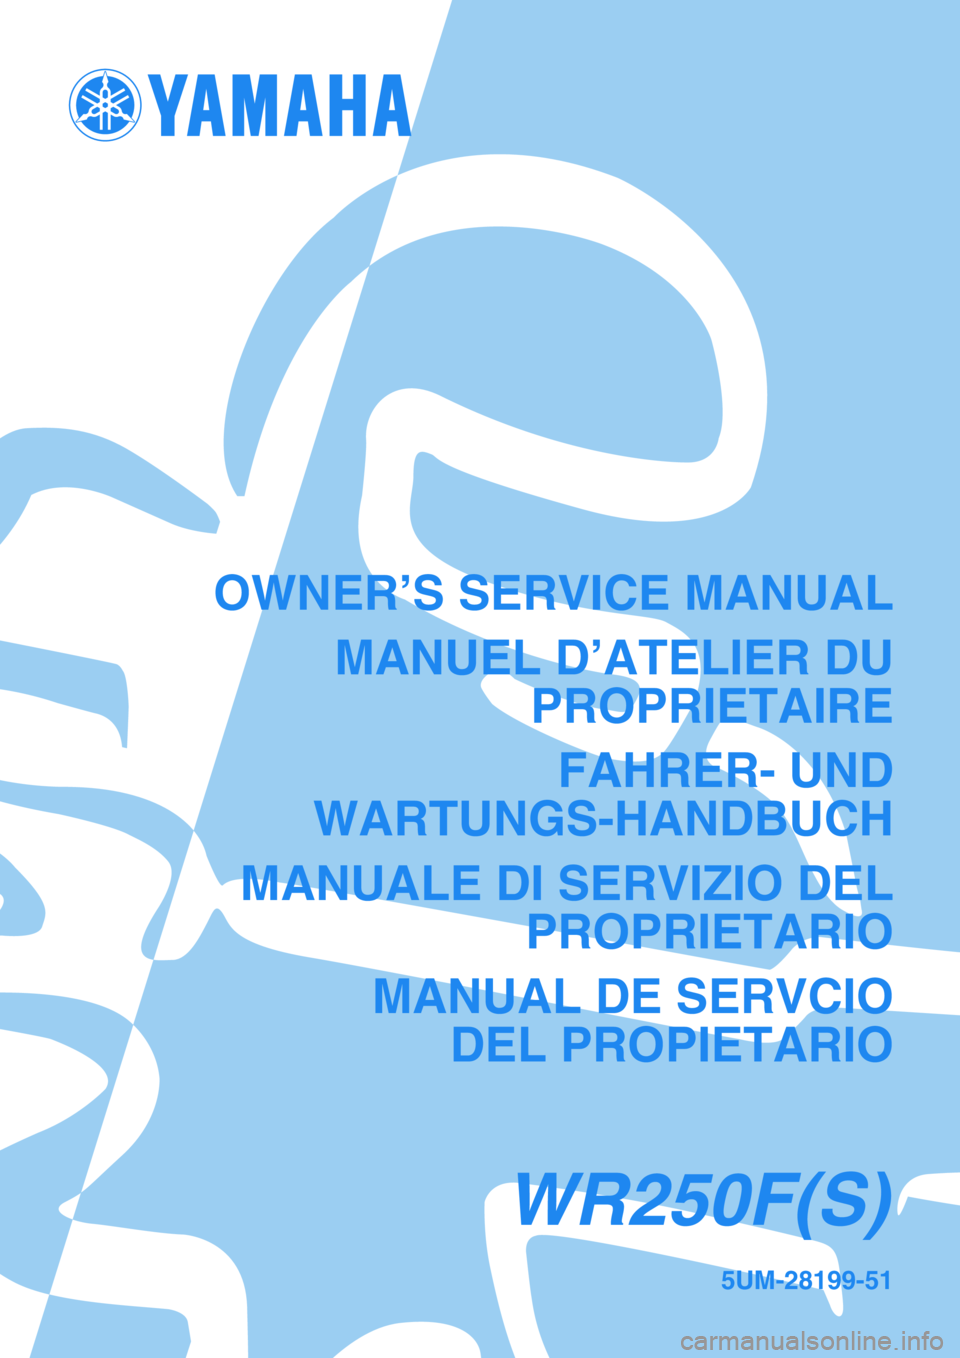 YAMAHA WR 250F 2004  Owners Manual 5UM-28199-51
WR250F(S)
OWNER’S SERVICE MANUAL
MANUEL D’ATELIER DU
PROPRIETAIRE
FAHRER- UND
WARTUNGS-HANDBUCH
MANUALE DI SERVIZIO DEL
PROPRIETARIO
MANUAL DE SERVCIO
DEL PROPIETARIO 